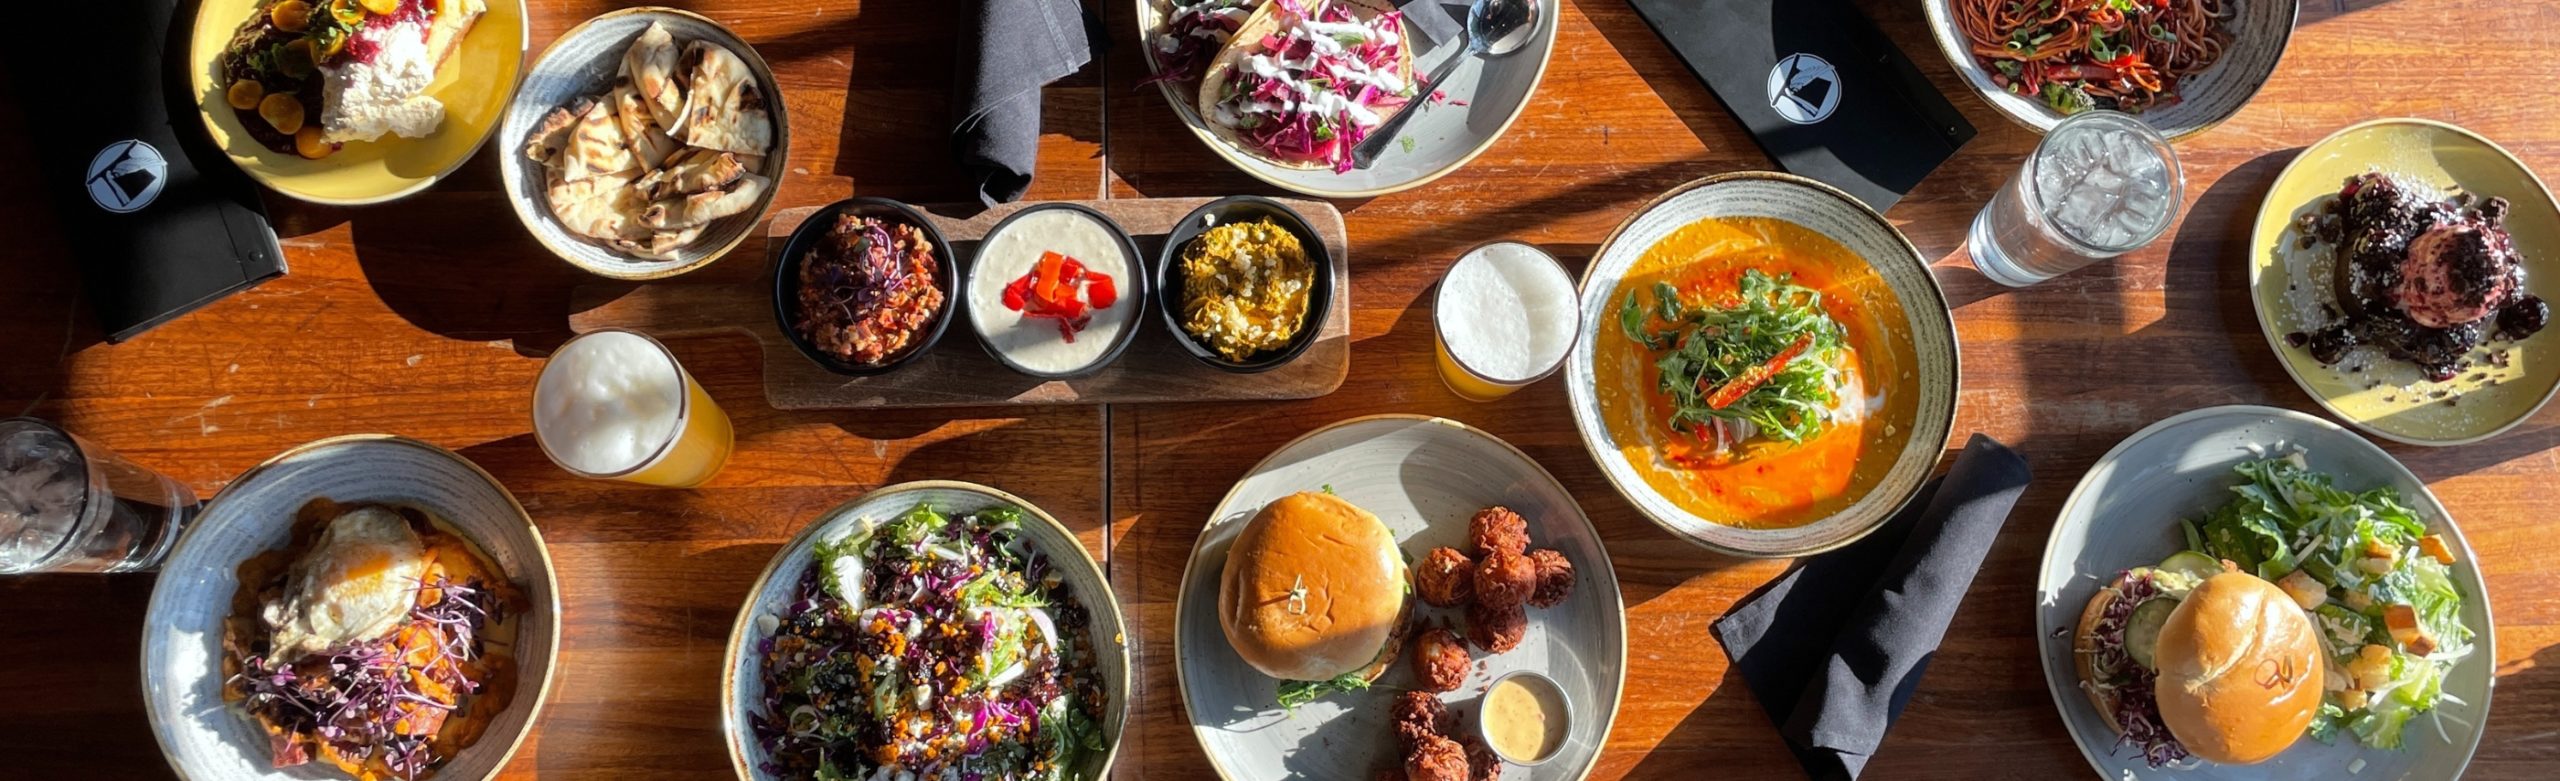 Warm Your Soul with The Top Hat’s New Winter Menu Image